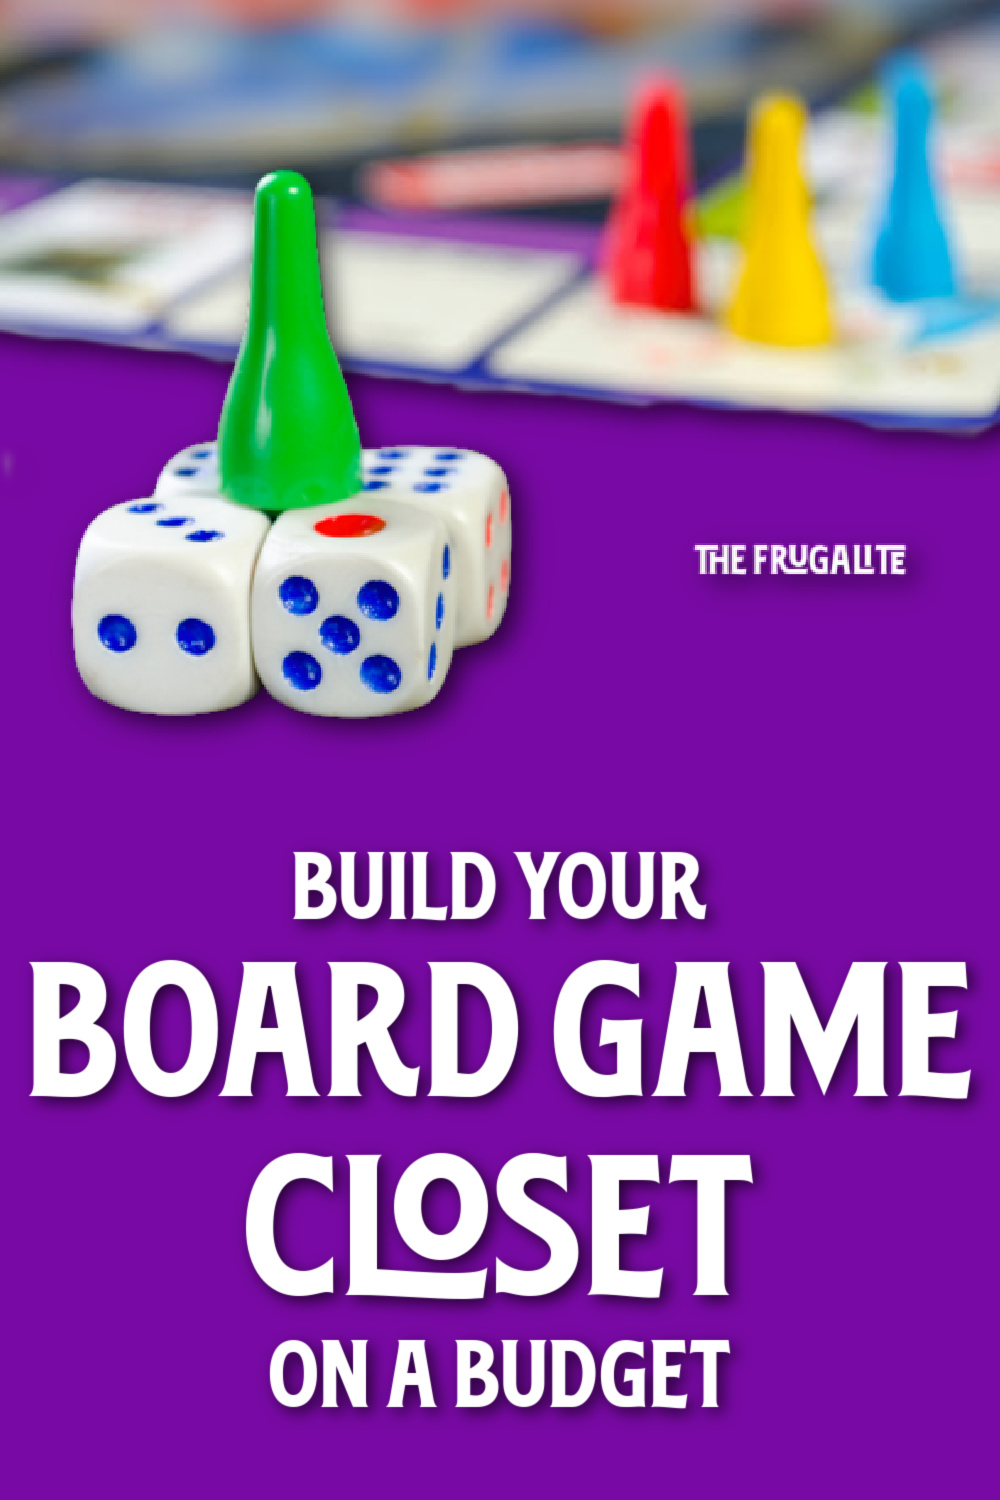 Build Your Board Game Closet on a Budget